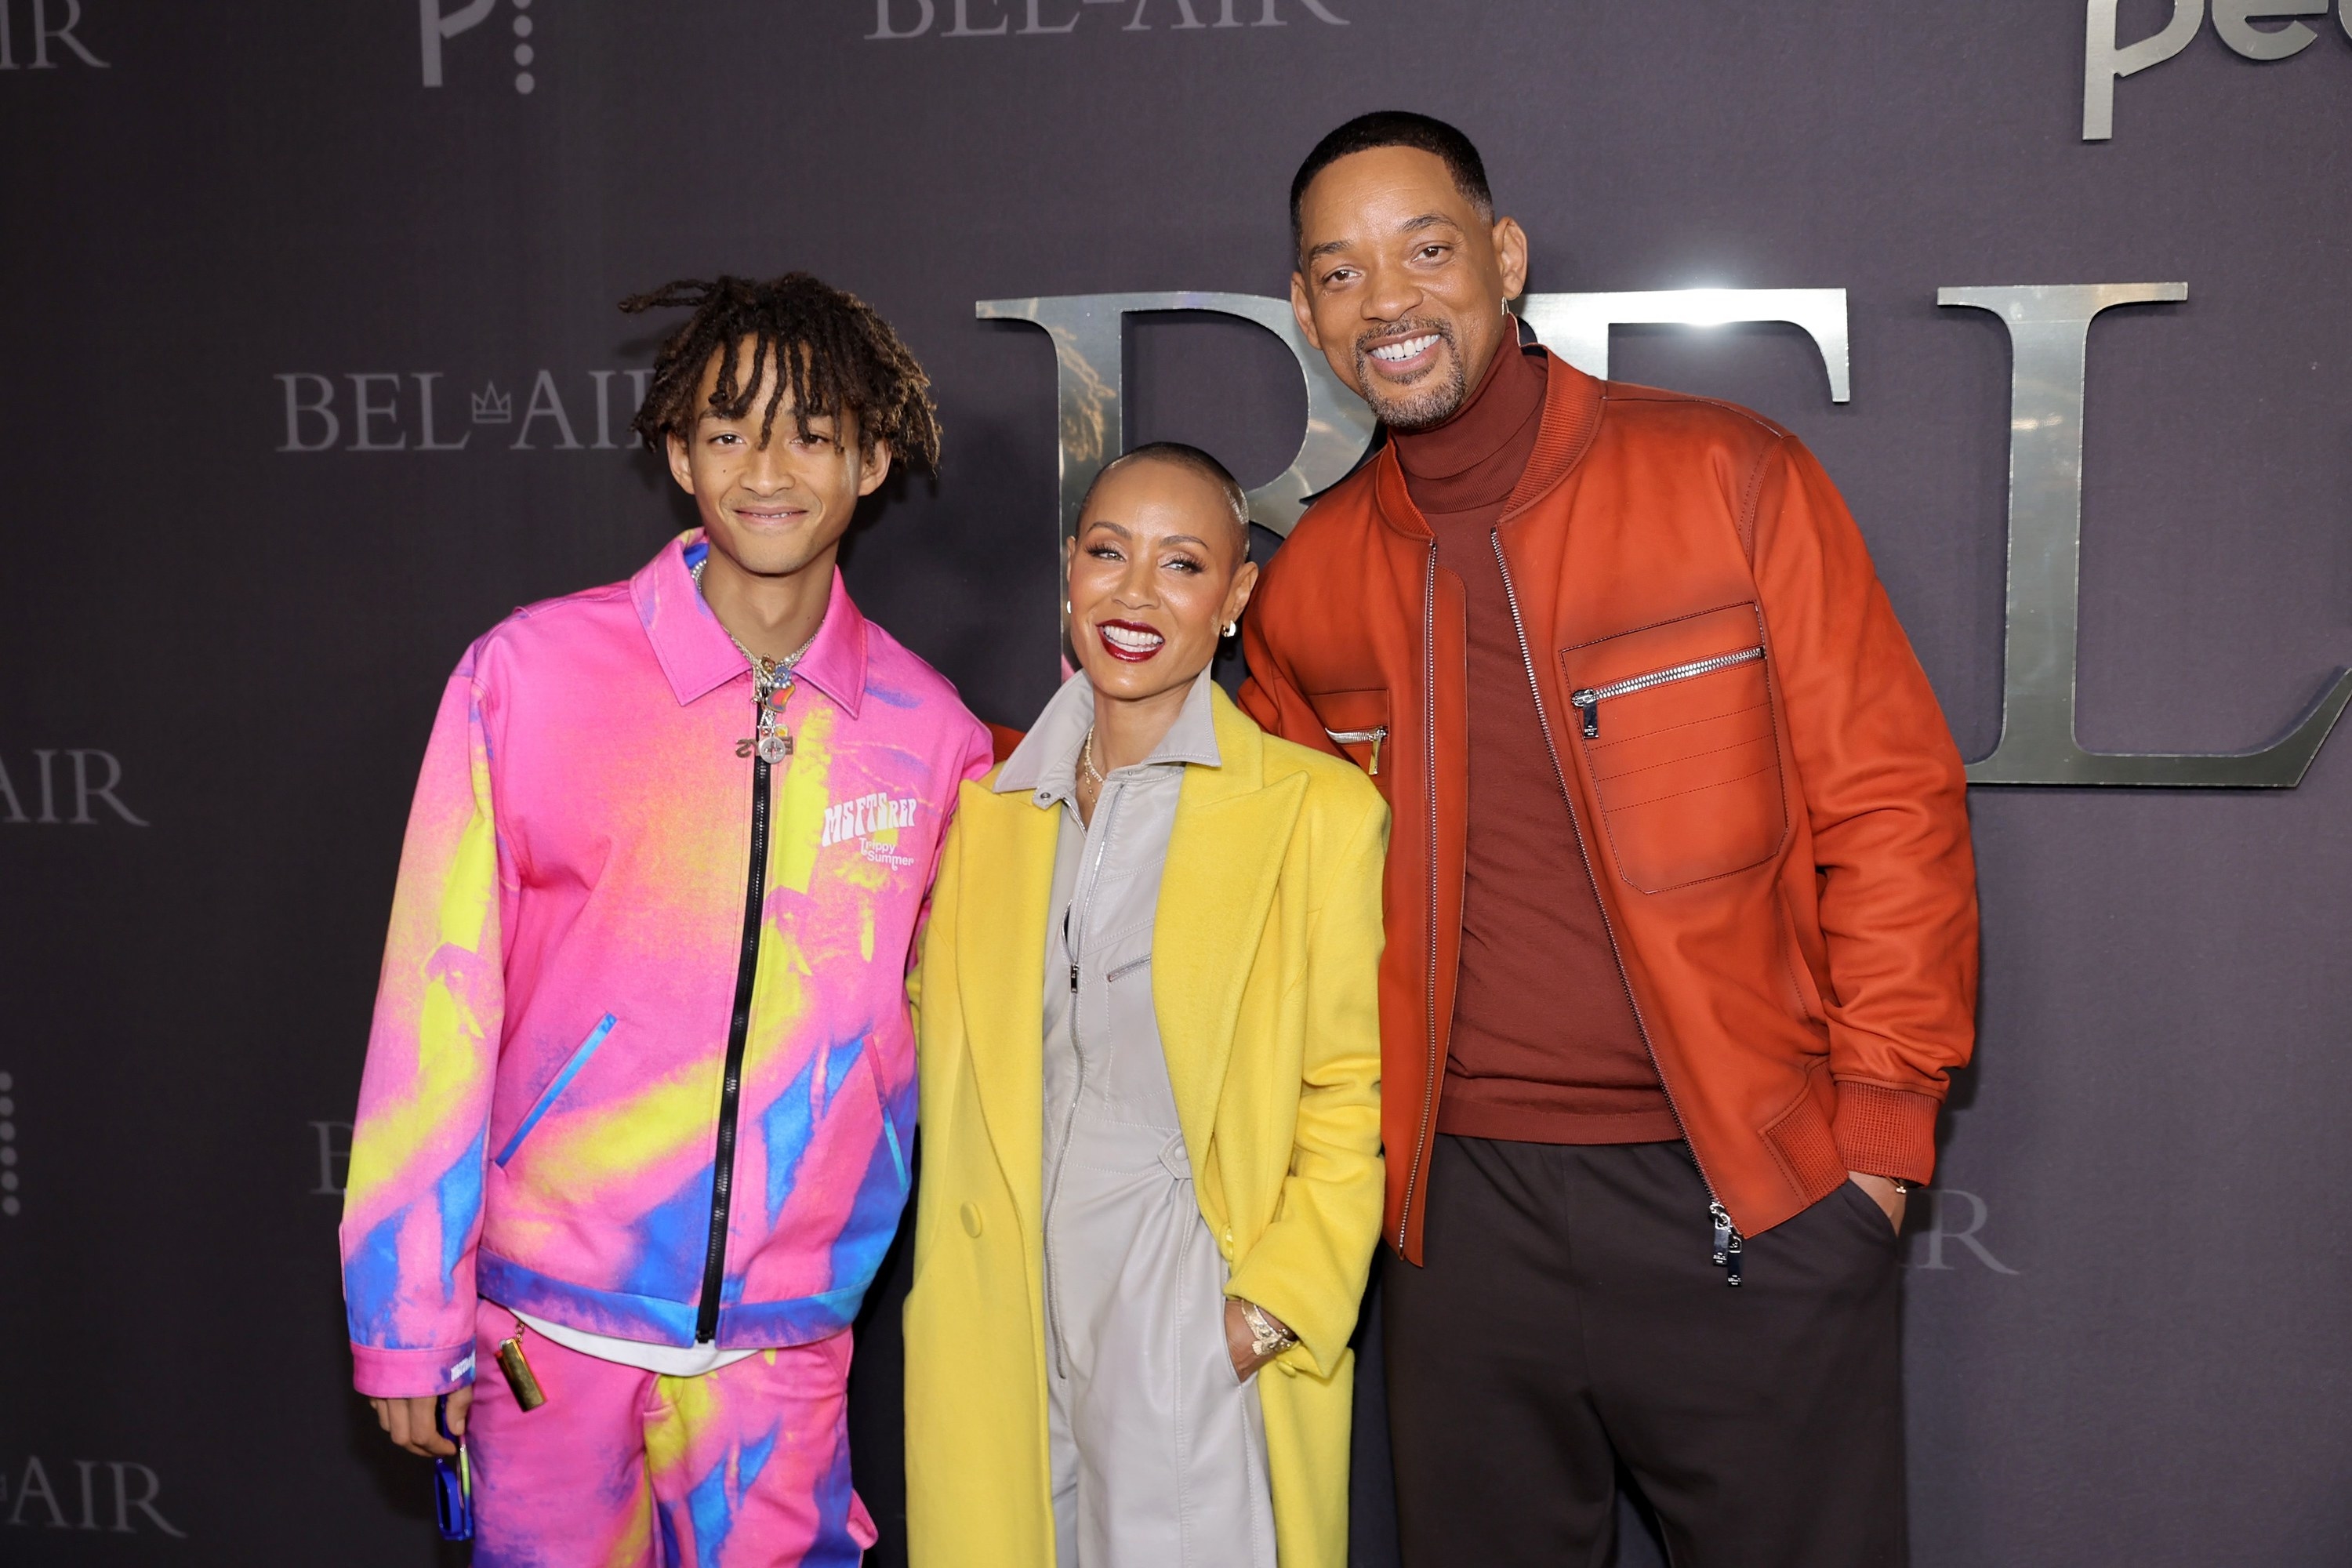 Jaden Smith hastily deletes dozens of posts late at night as concerned fans  say 'uh oh' after weeks of worrying behavior